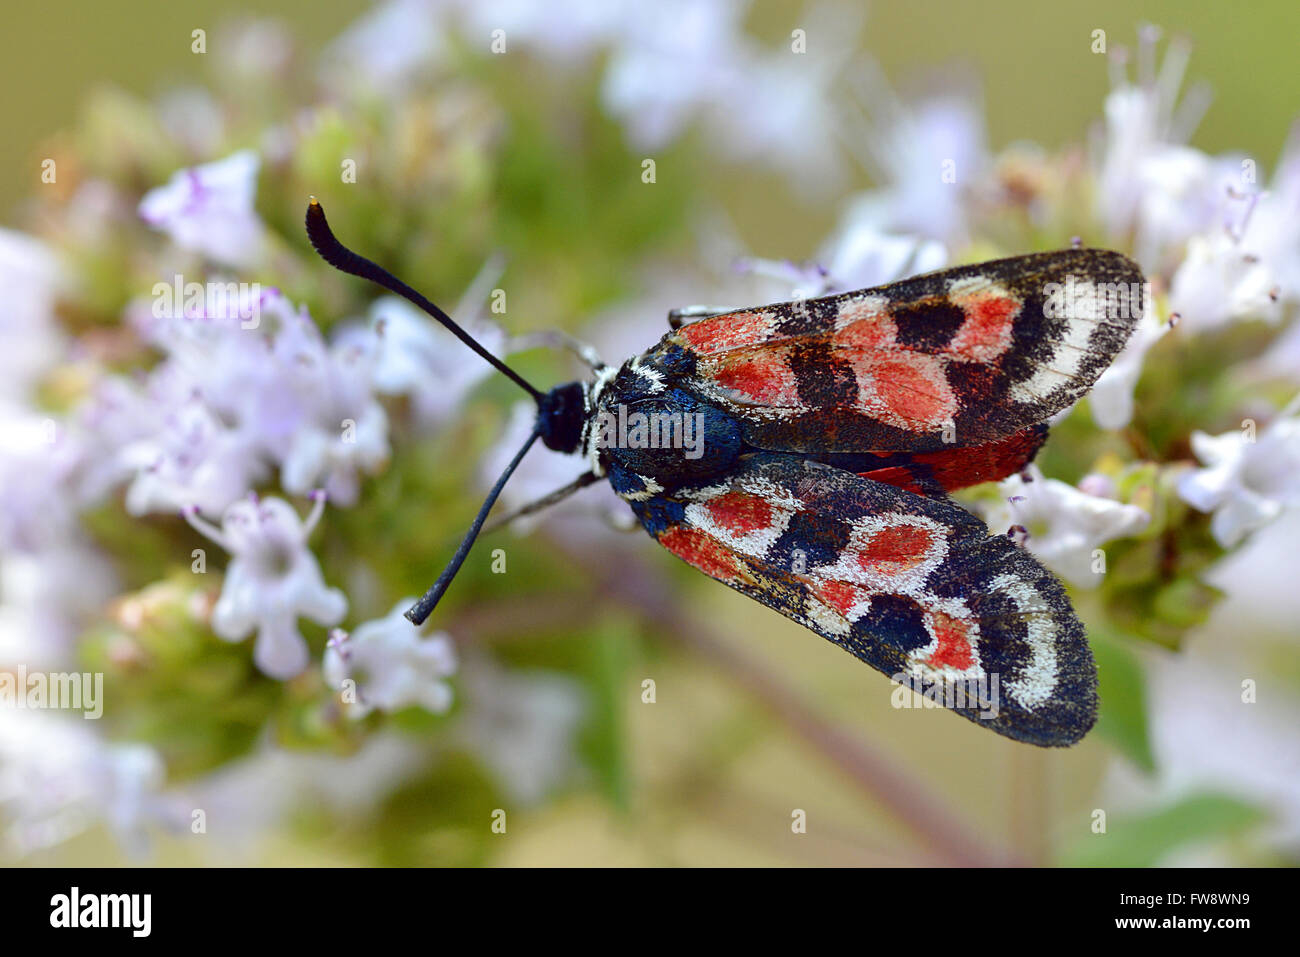 Zygaena carniolica butterfly on flower seen from above Stock Photo